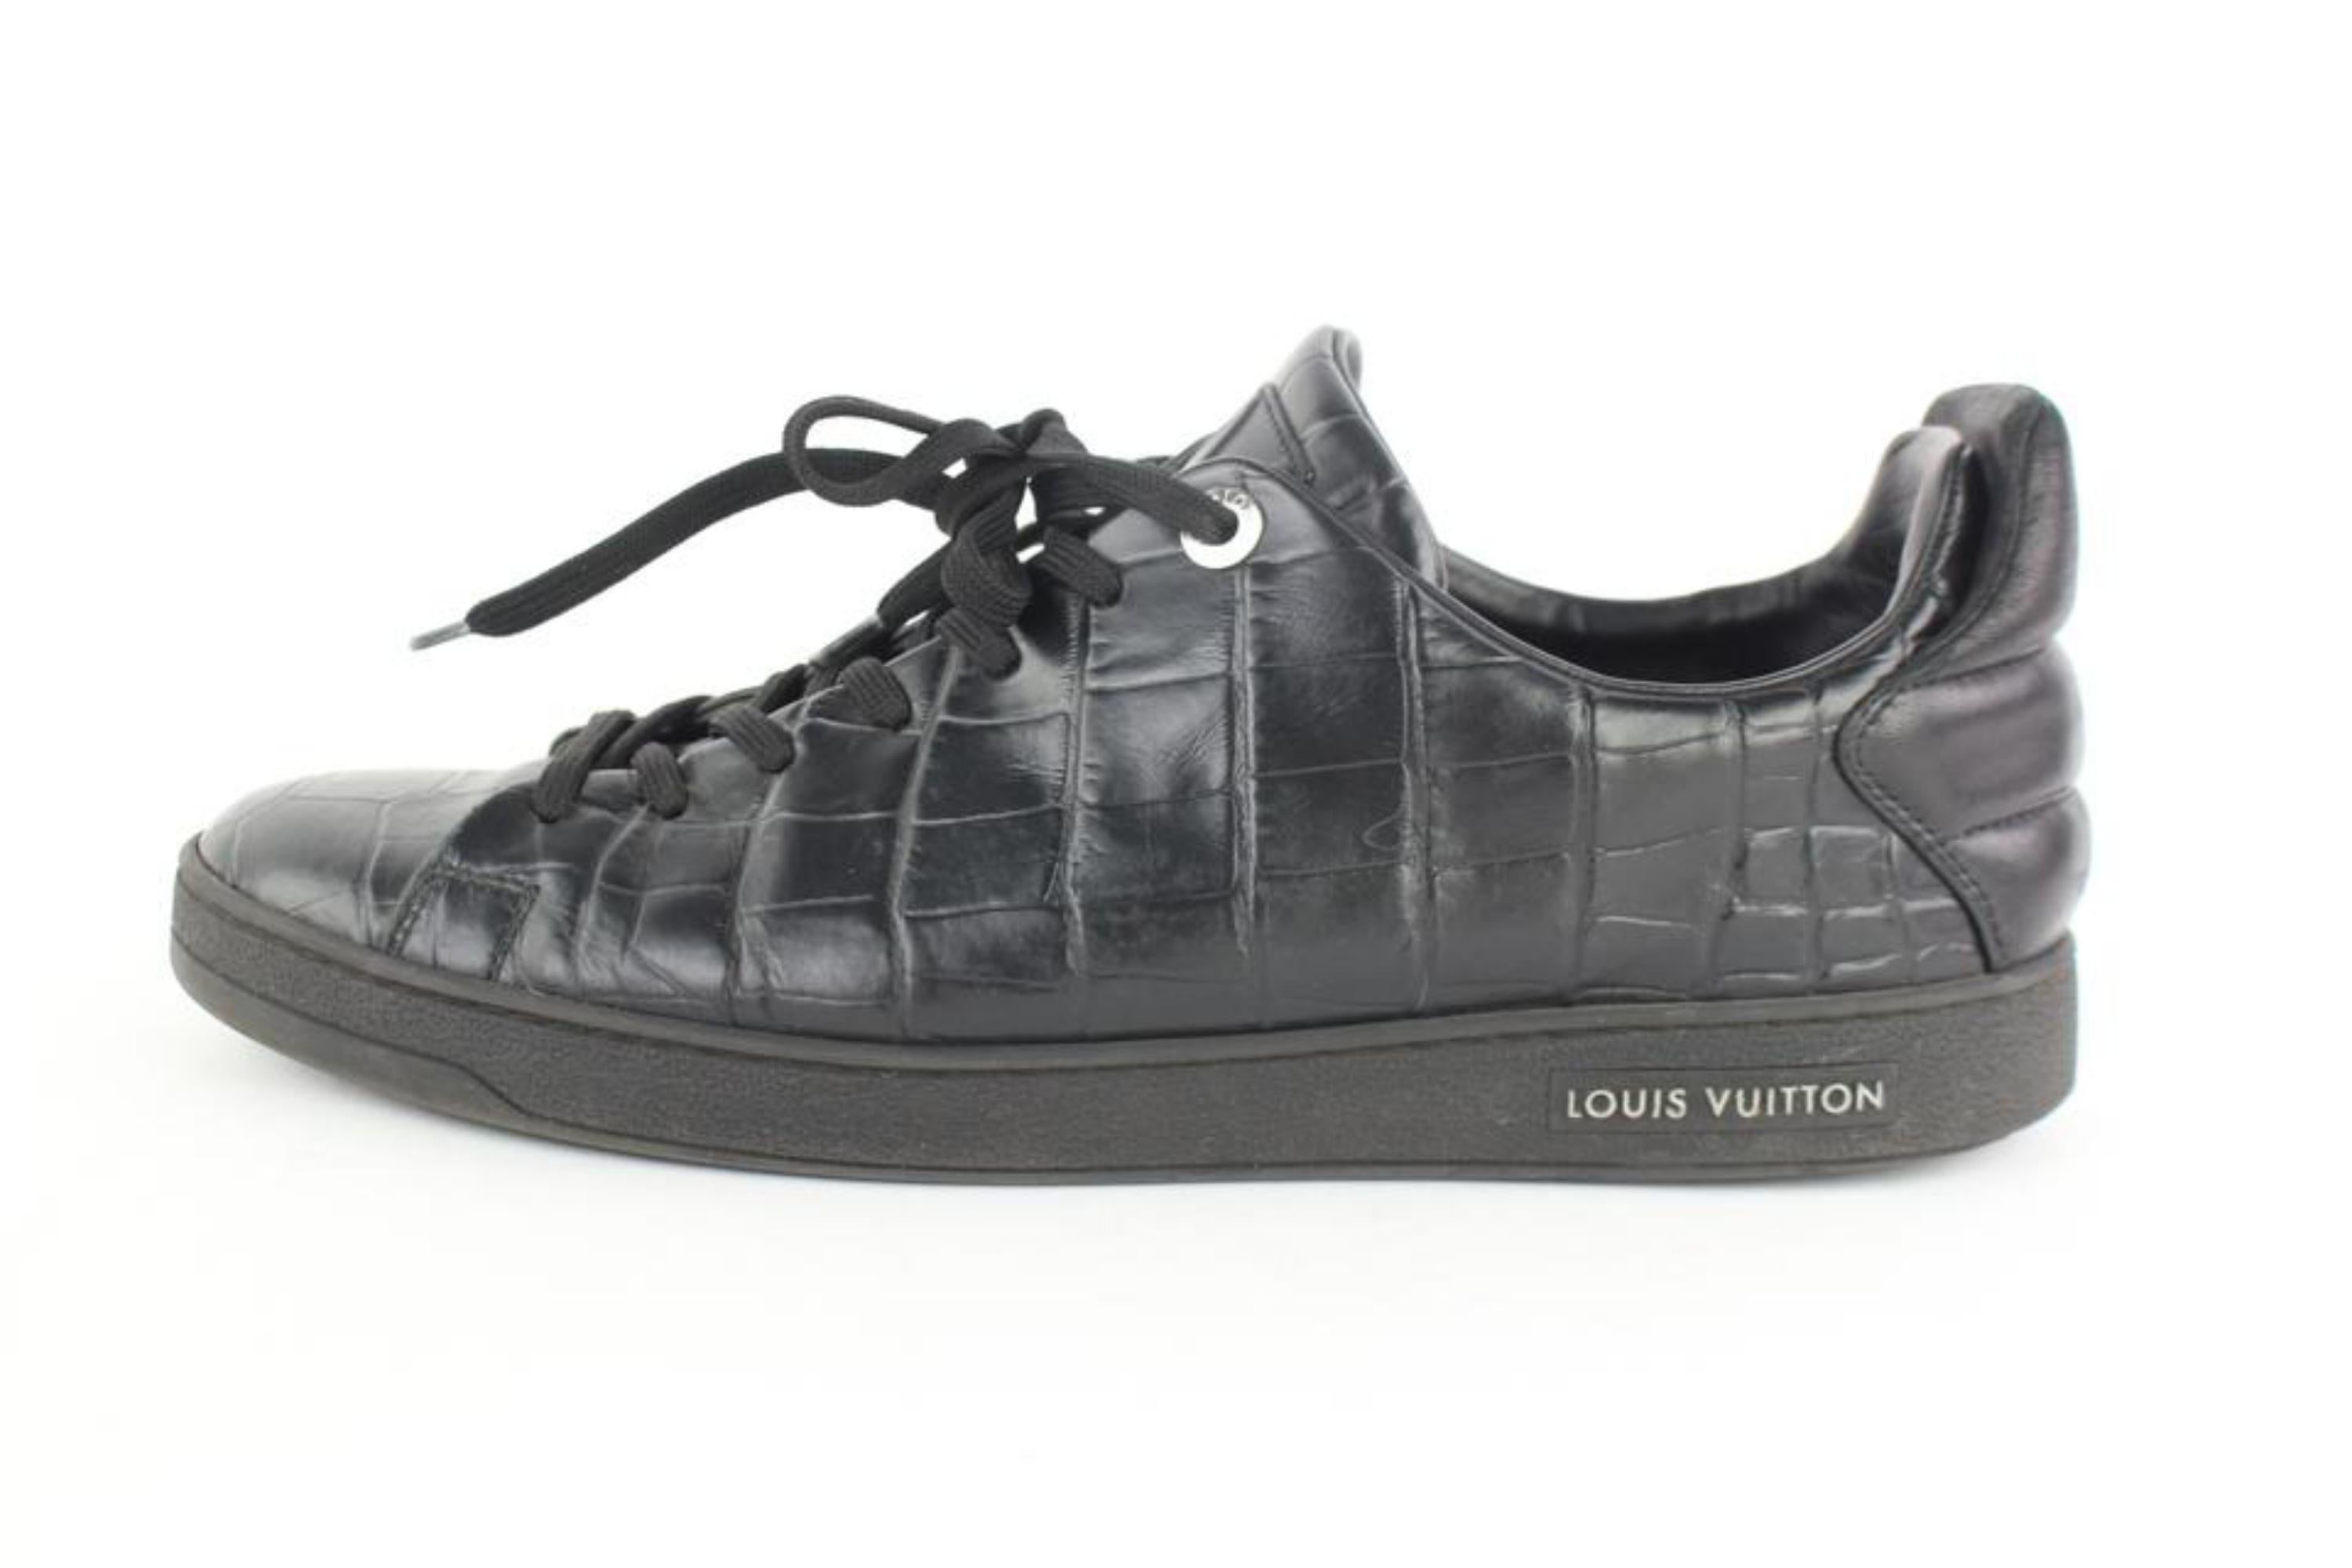 Louis Vuitton Black Croc Embossed Low Top Trainer 6lz1113 Sneakers For Sale 2